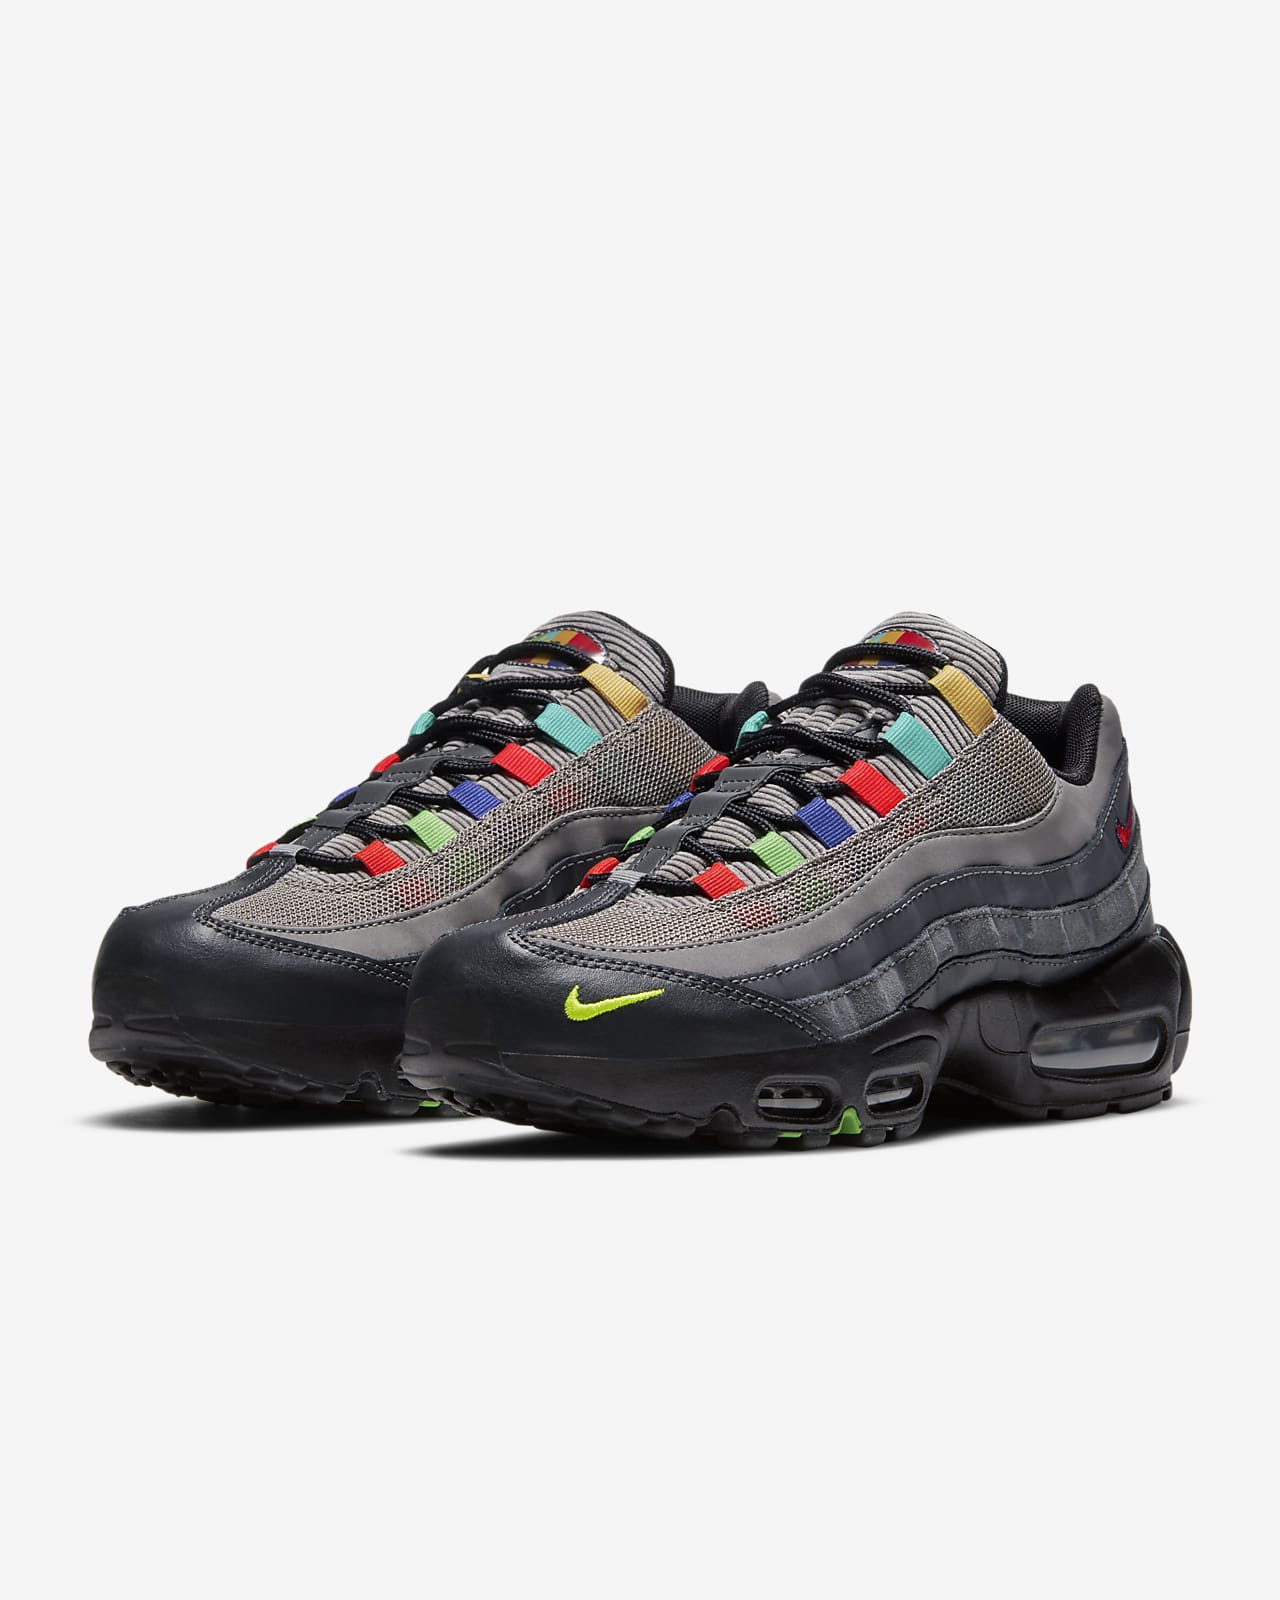 when did nike 95s come out